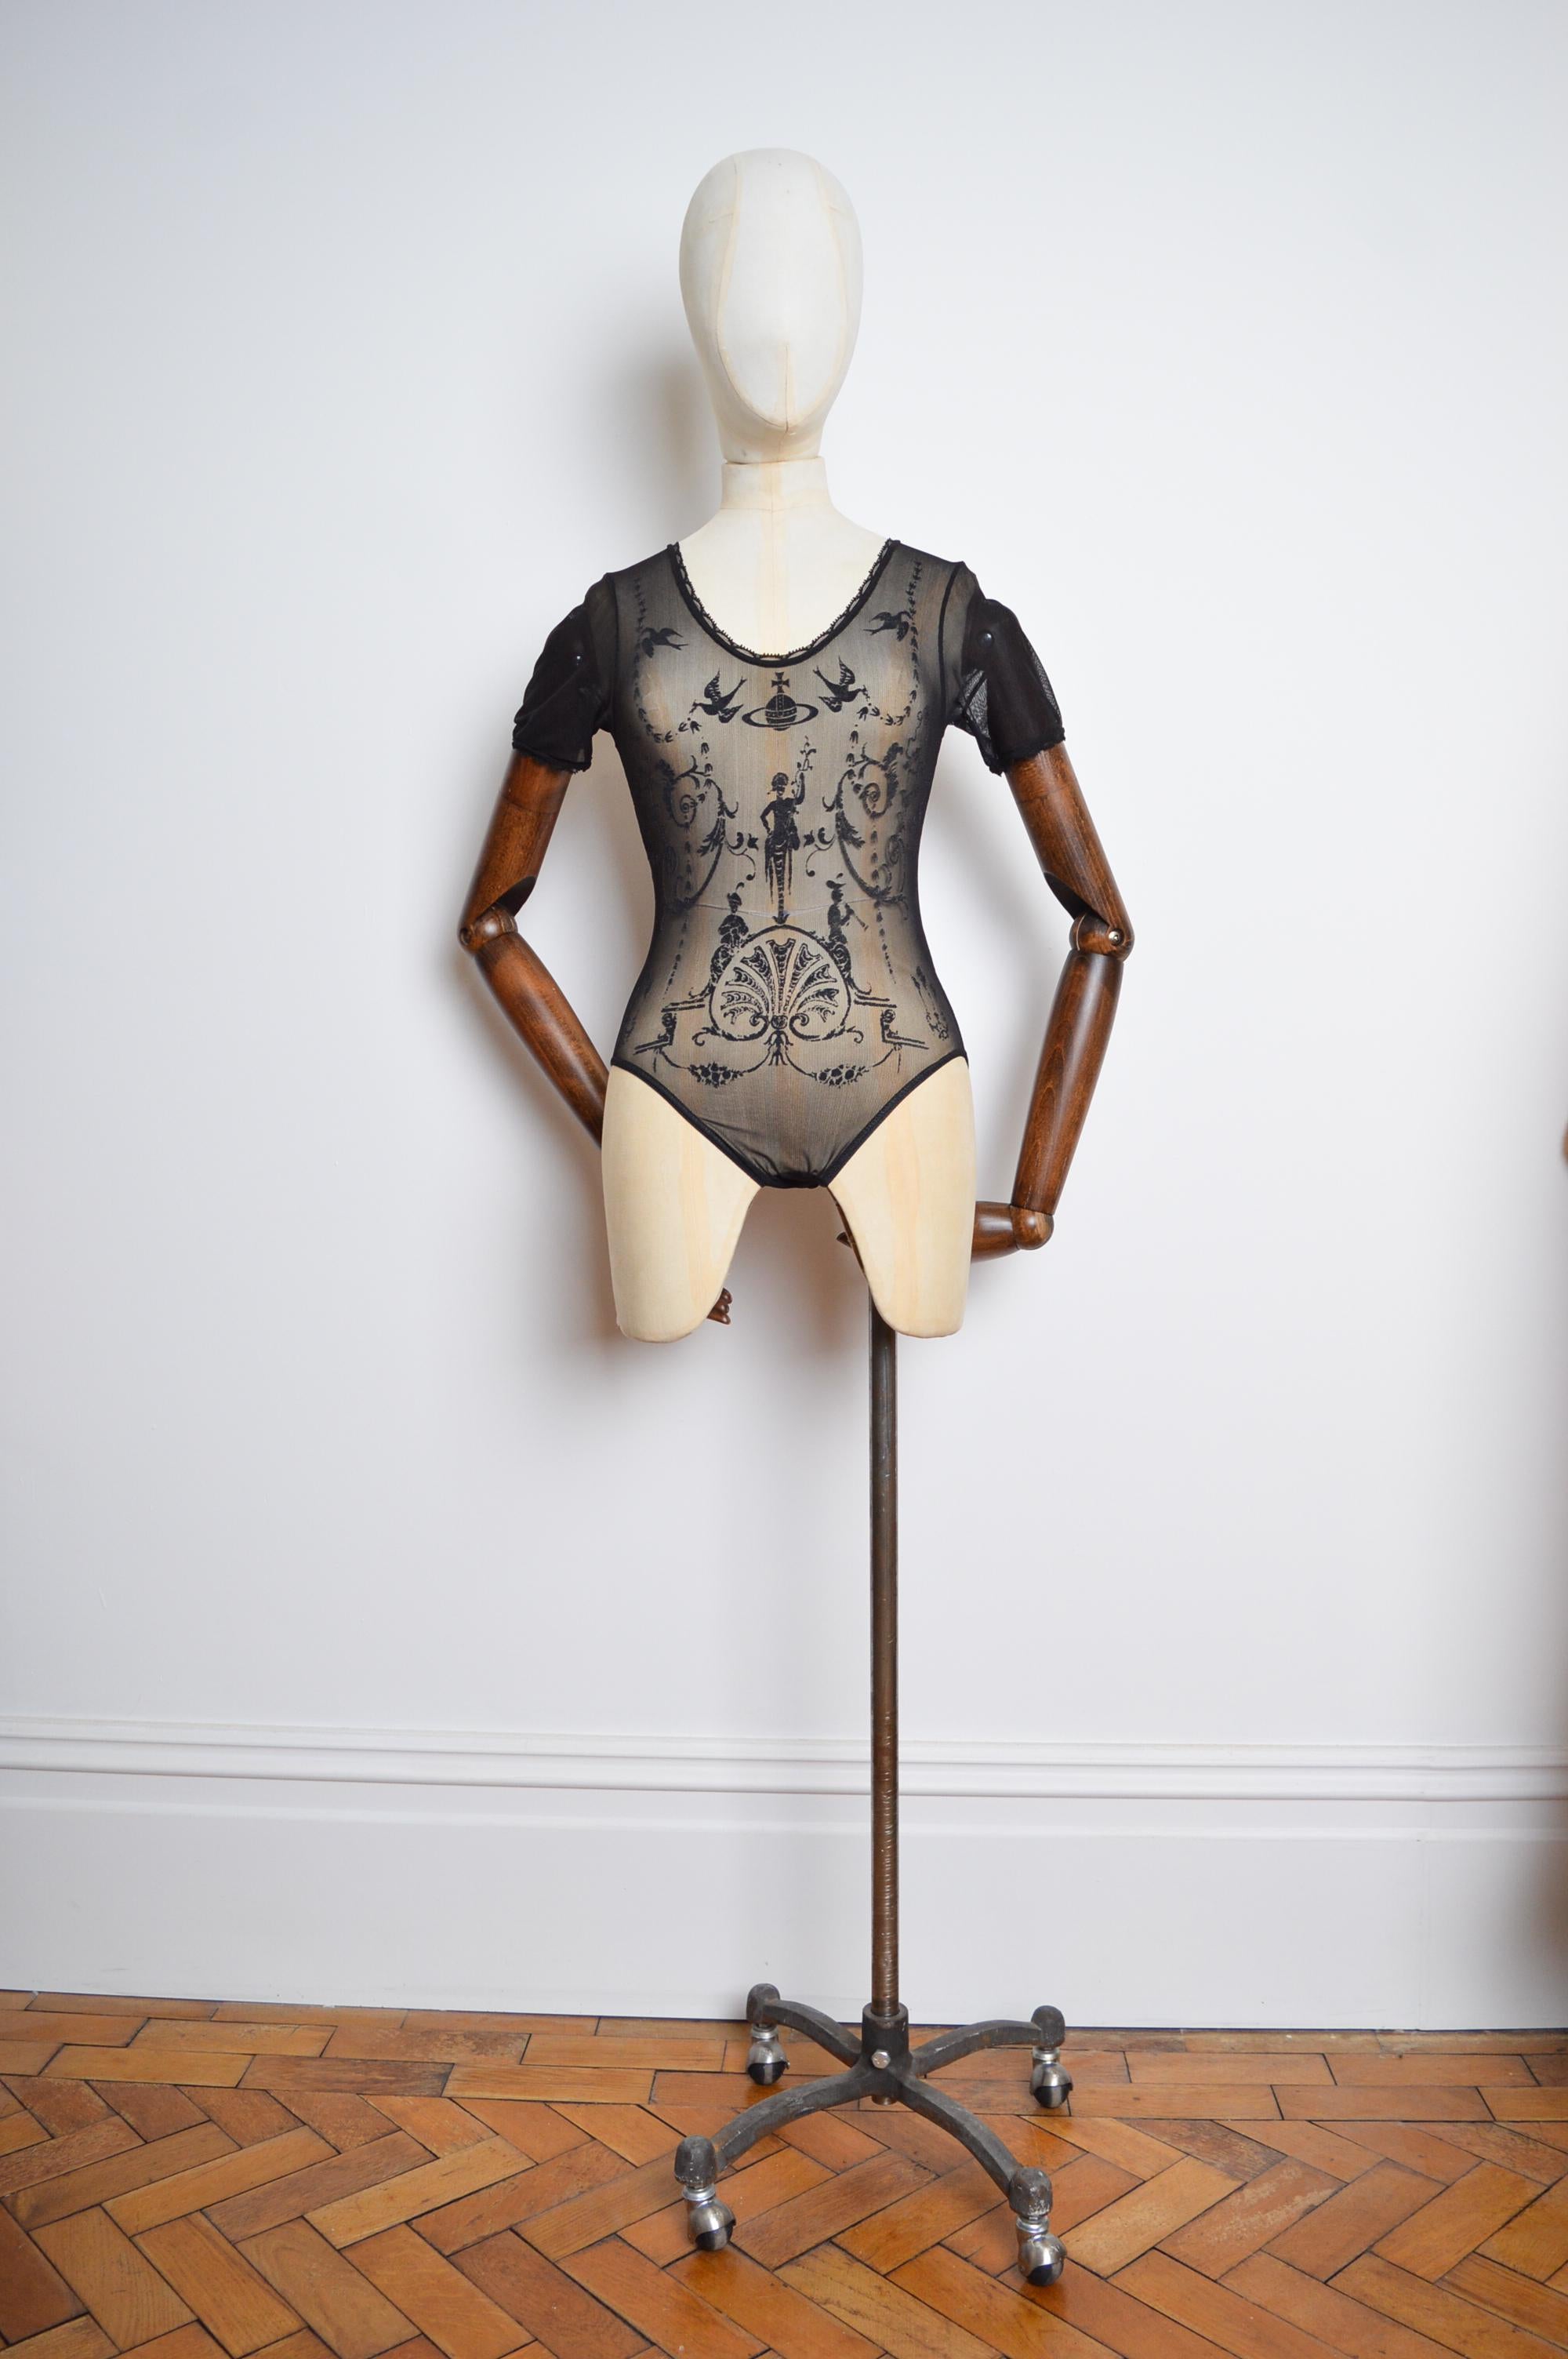 1992 Vivienne Westwood x Sock Shop Black Toile Sheer Mesh Bodysuit Top In Excellent Condition For Sale In Sheffield, GB